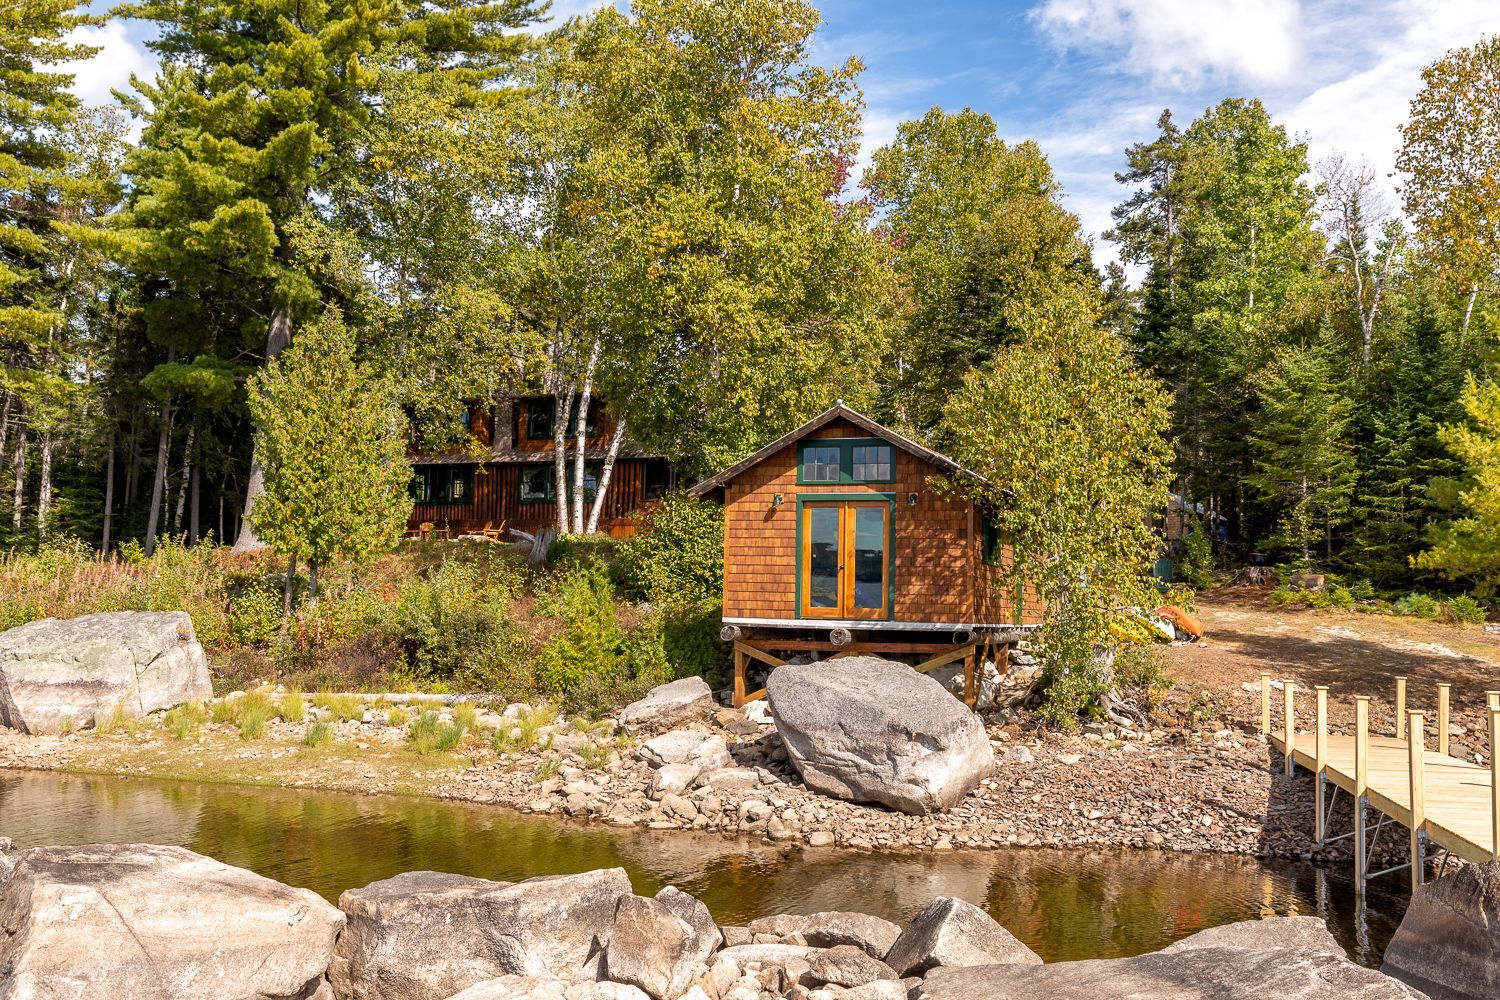 Combination boathouse and summer bunkhouse at Breakwater Lodge